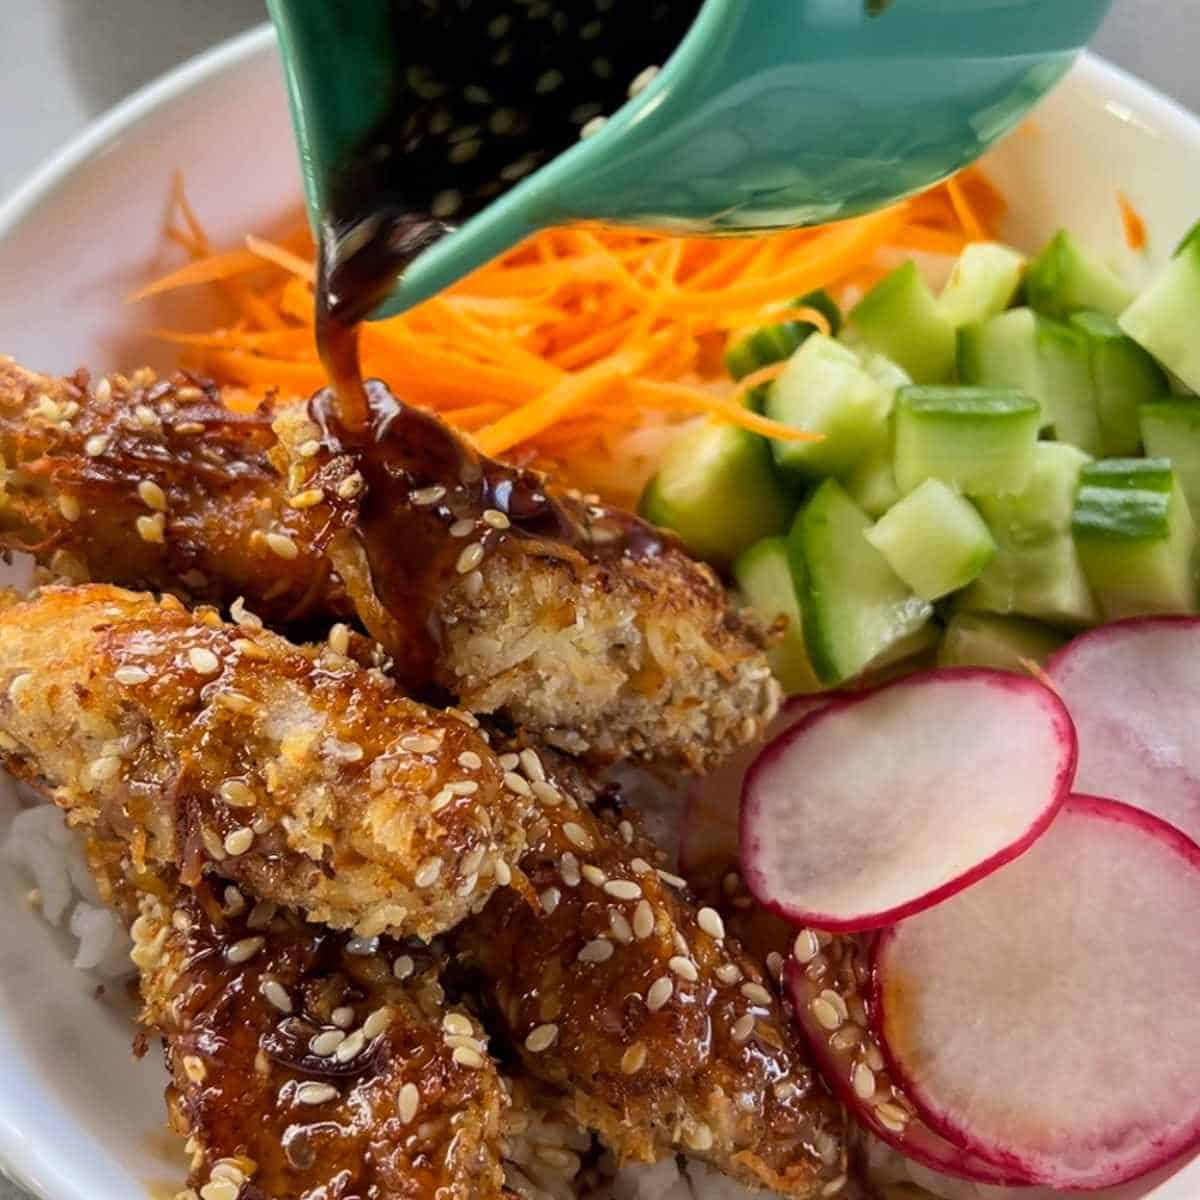 A close up shot of a Crispy Chicken Poke Bowl, sauce is being poured over the top of the crumbed chicken pieces.